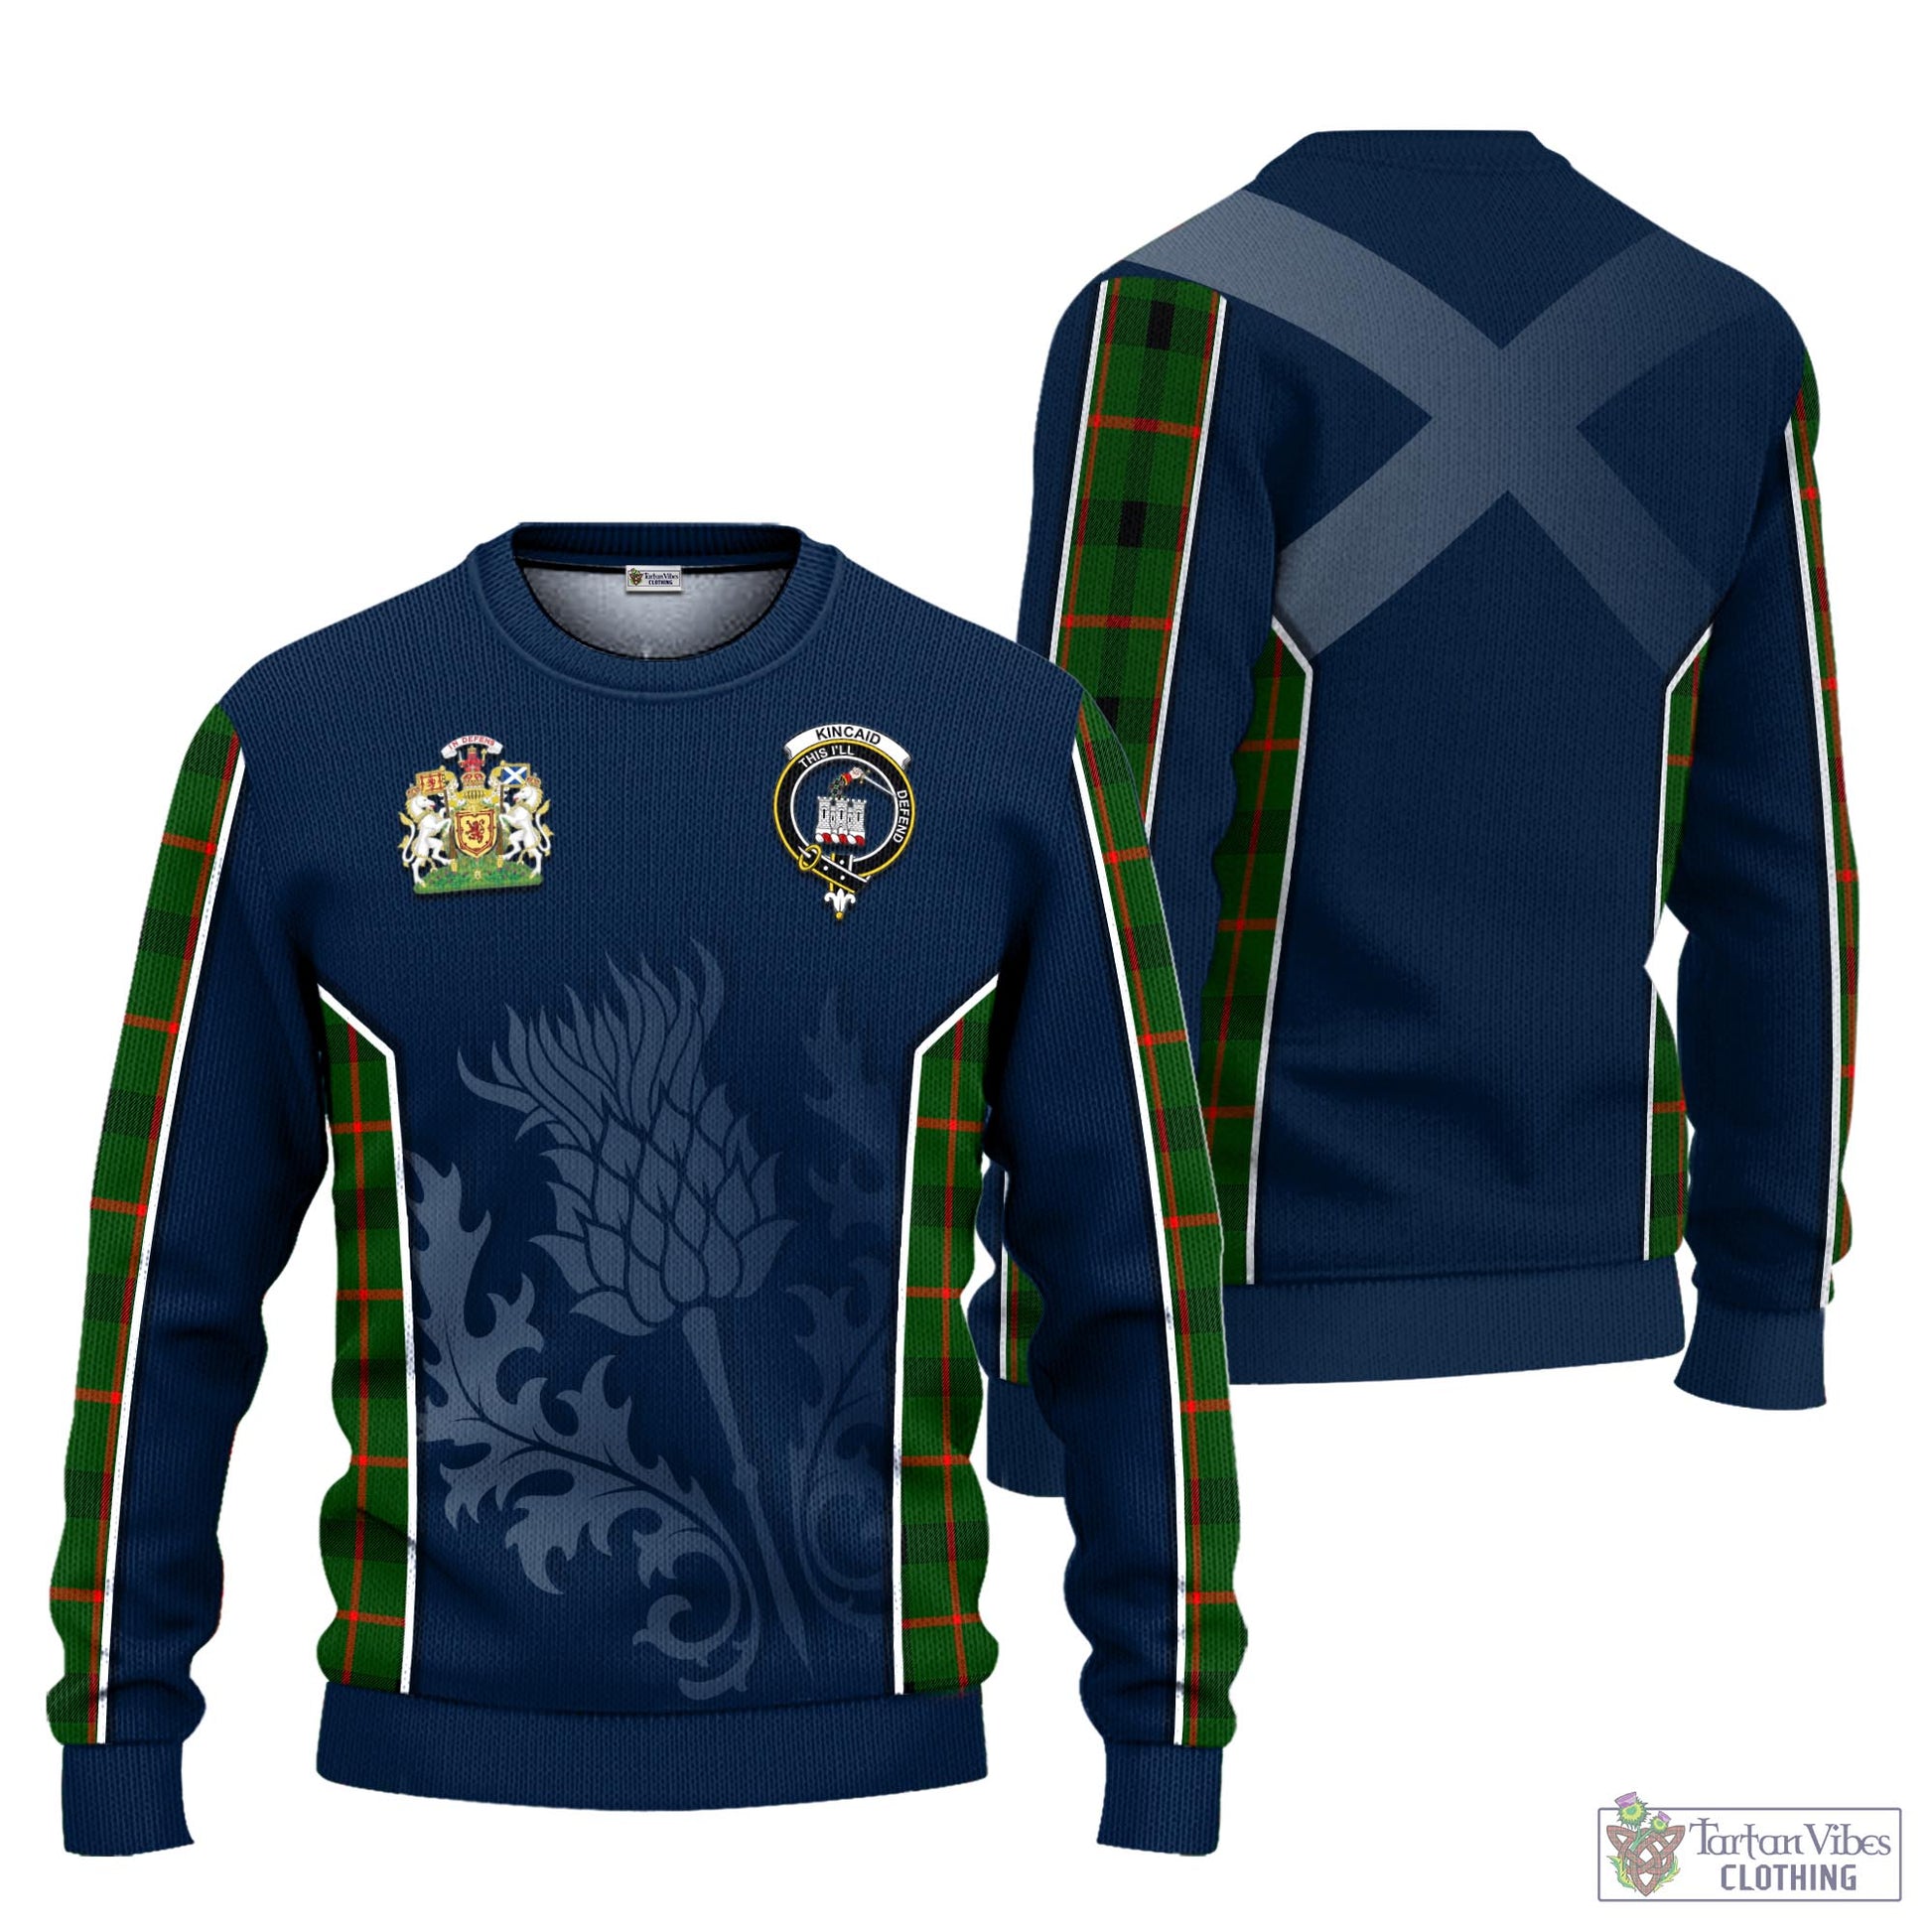 Tartan Vibes Clothing Kincaid Modern Tartan Knitted Sweatshirt with Family Crest and Scottish Thistle Vibes Sport Style